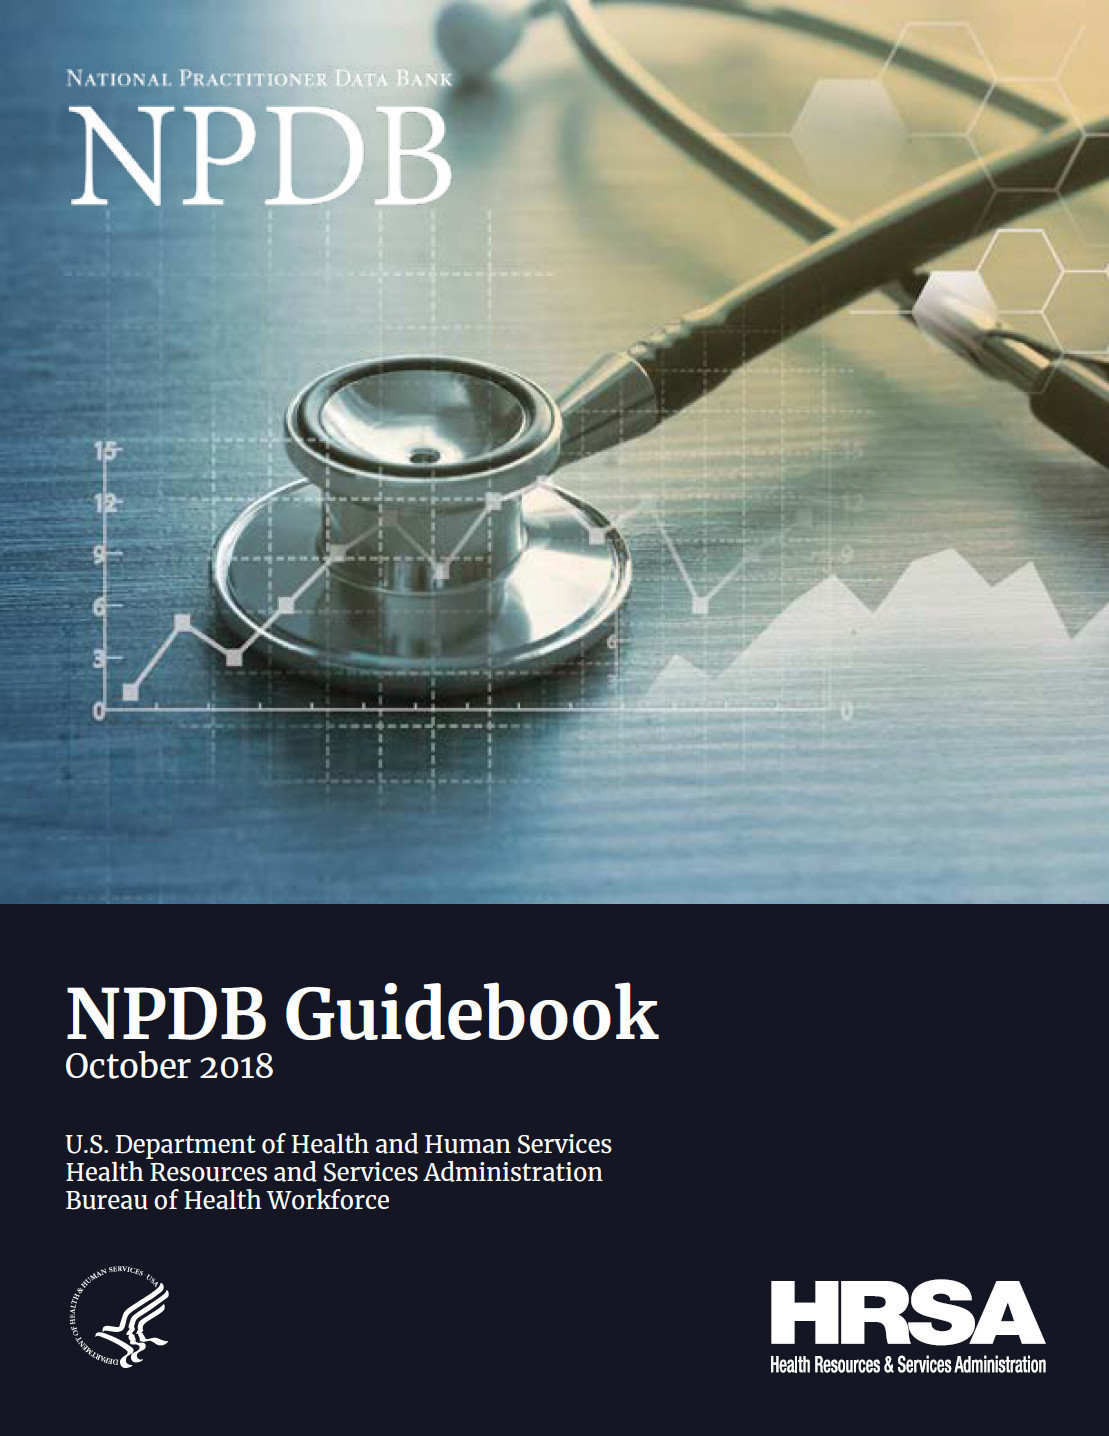 Screenshot of the NPDB Guidebook Cover page